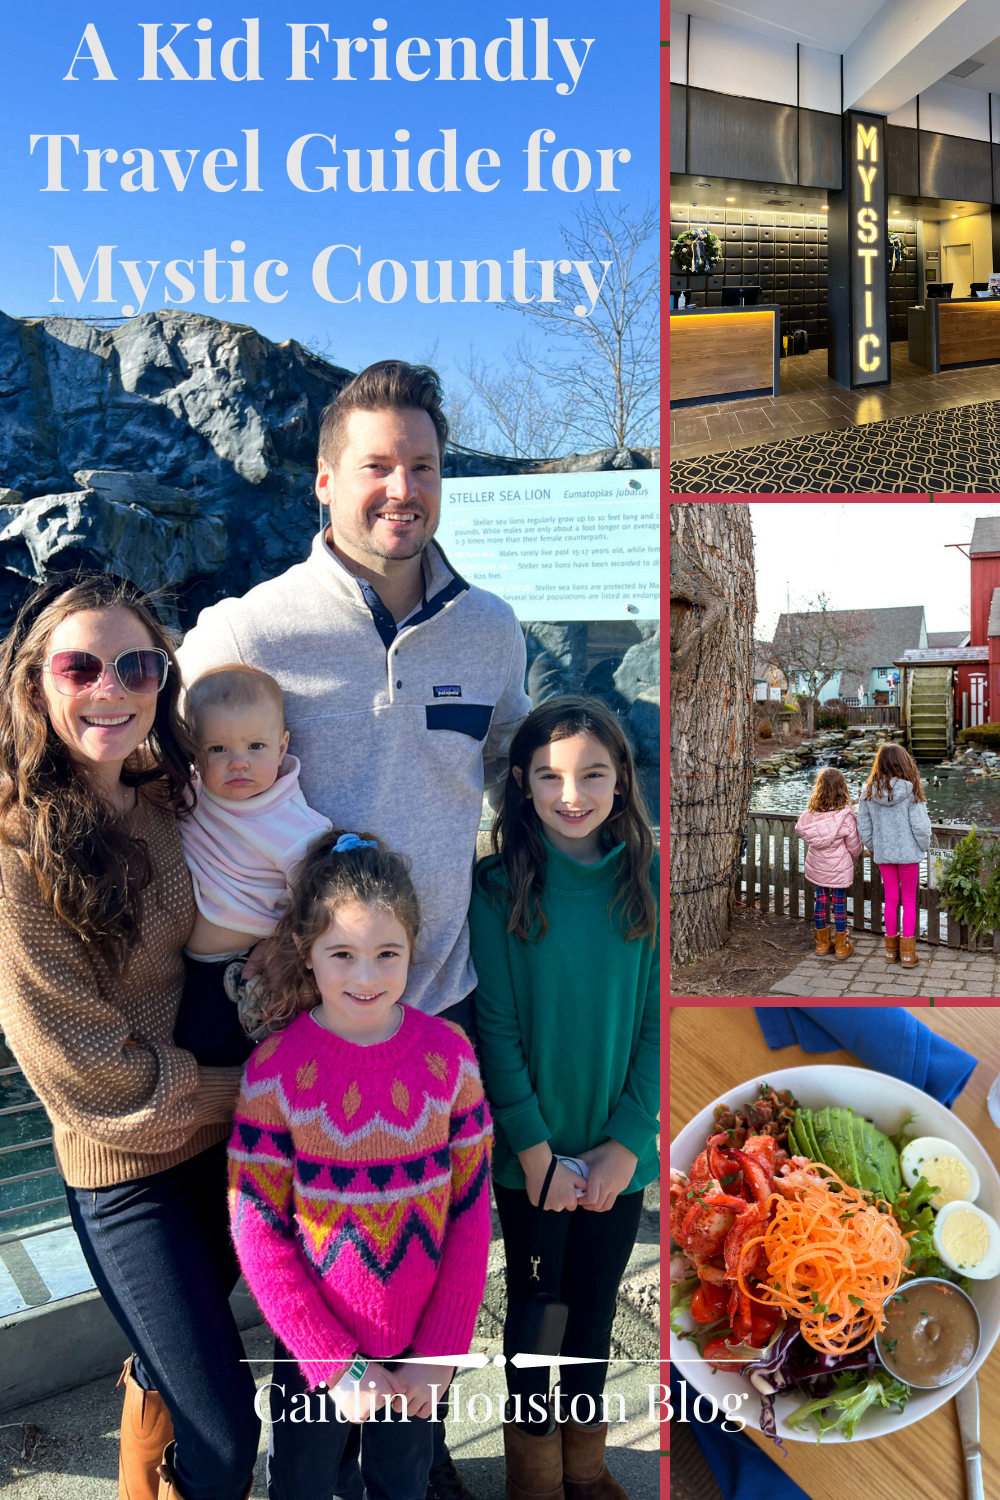 A Kid Friendly Travel Guide for Mystic Country